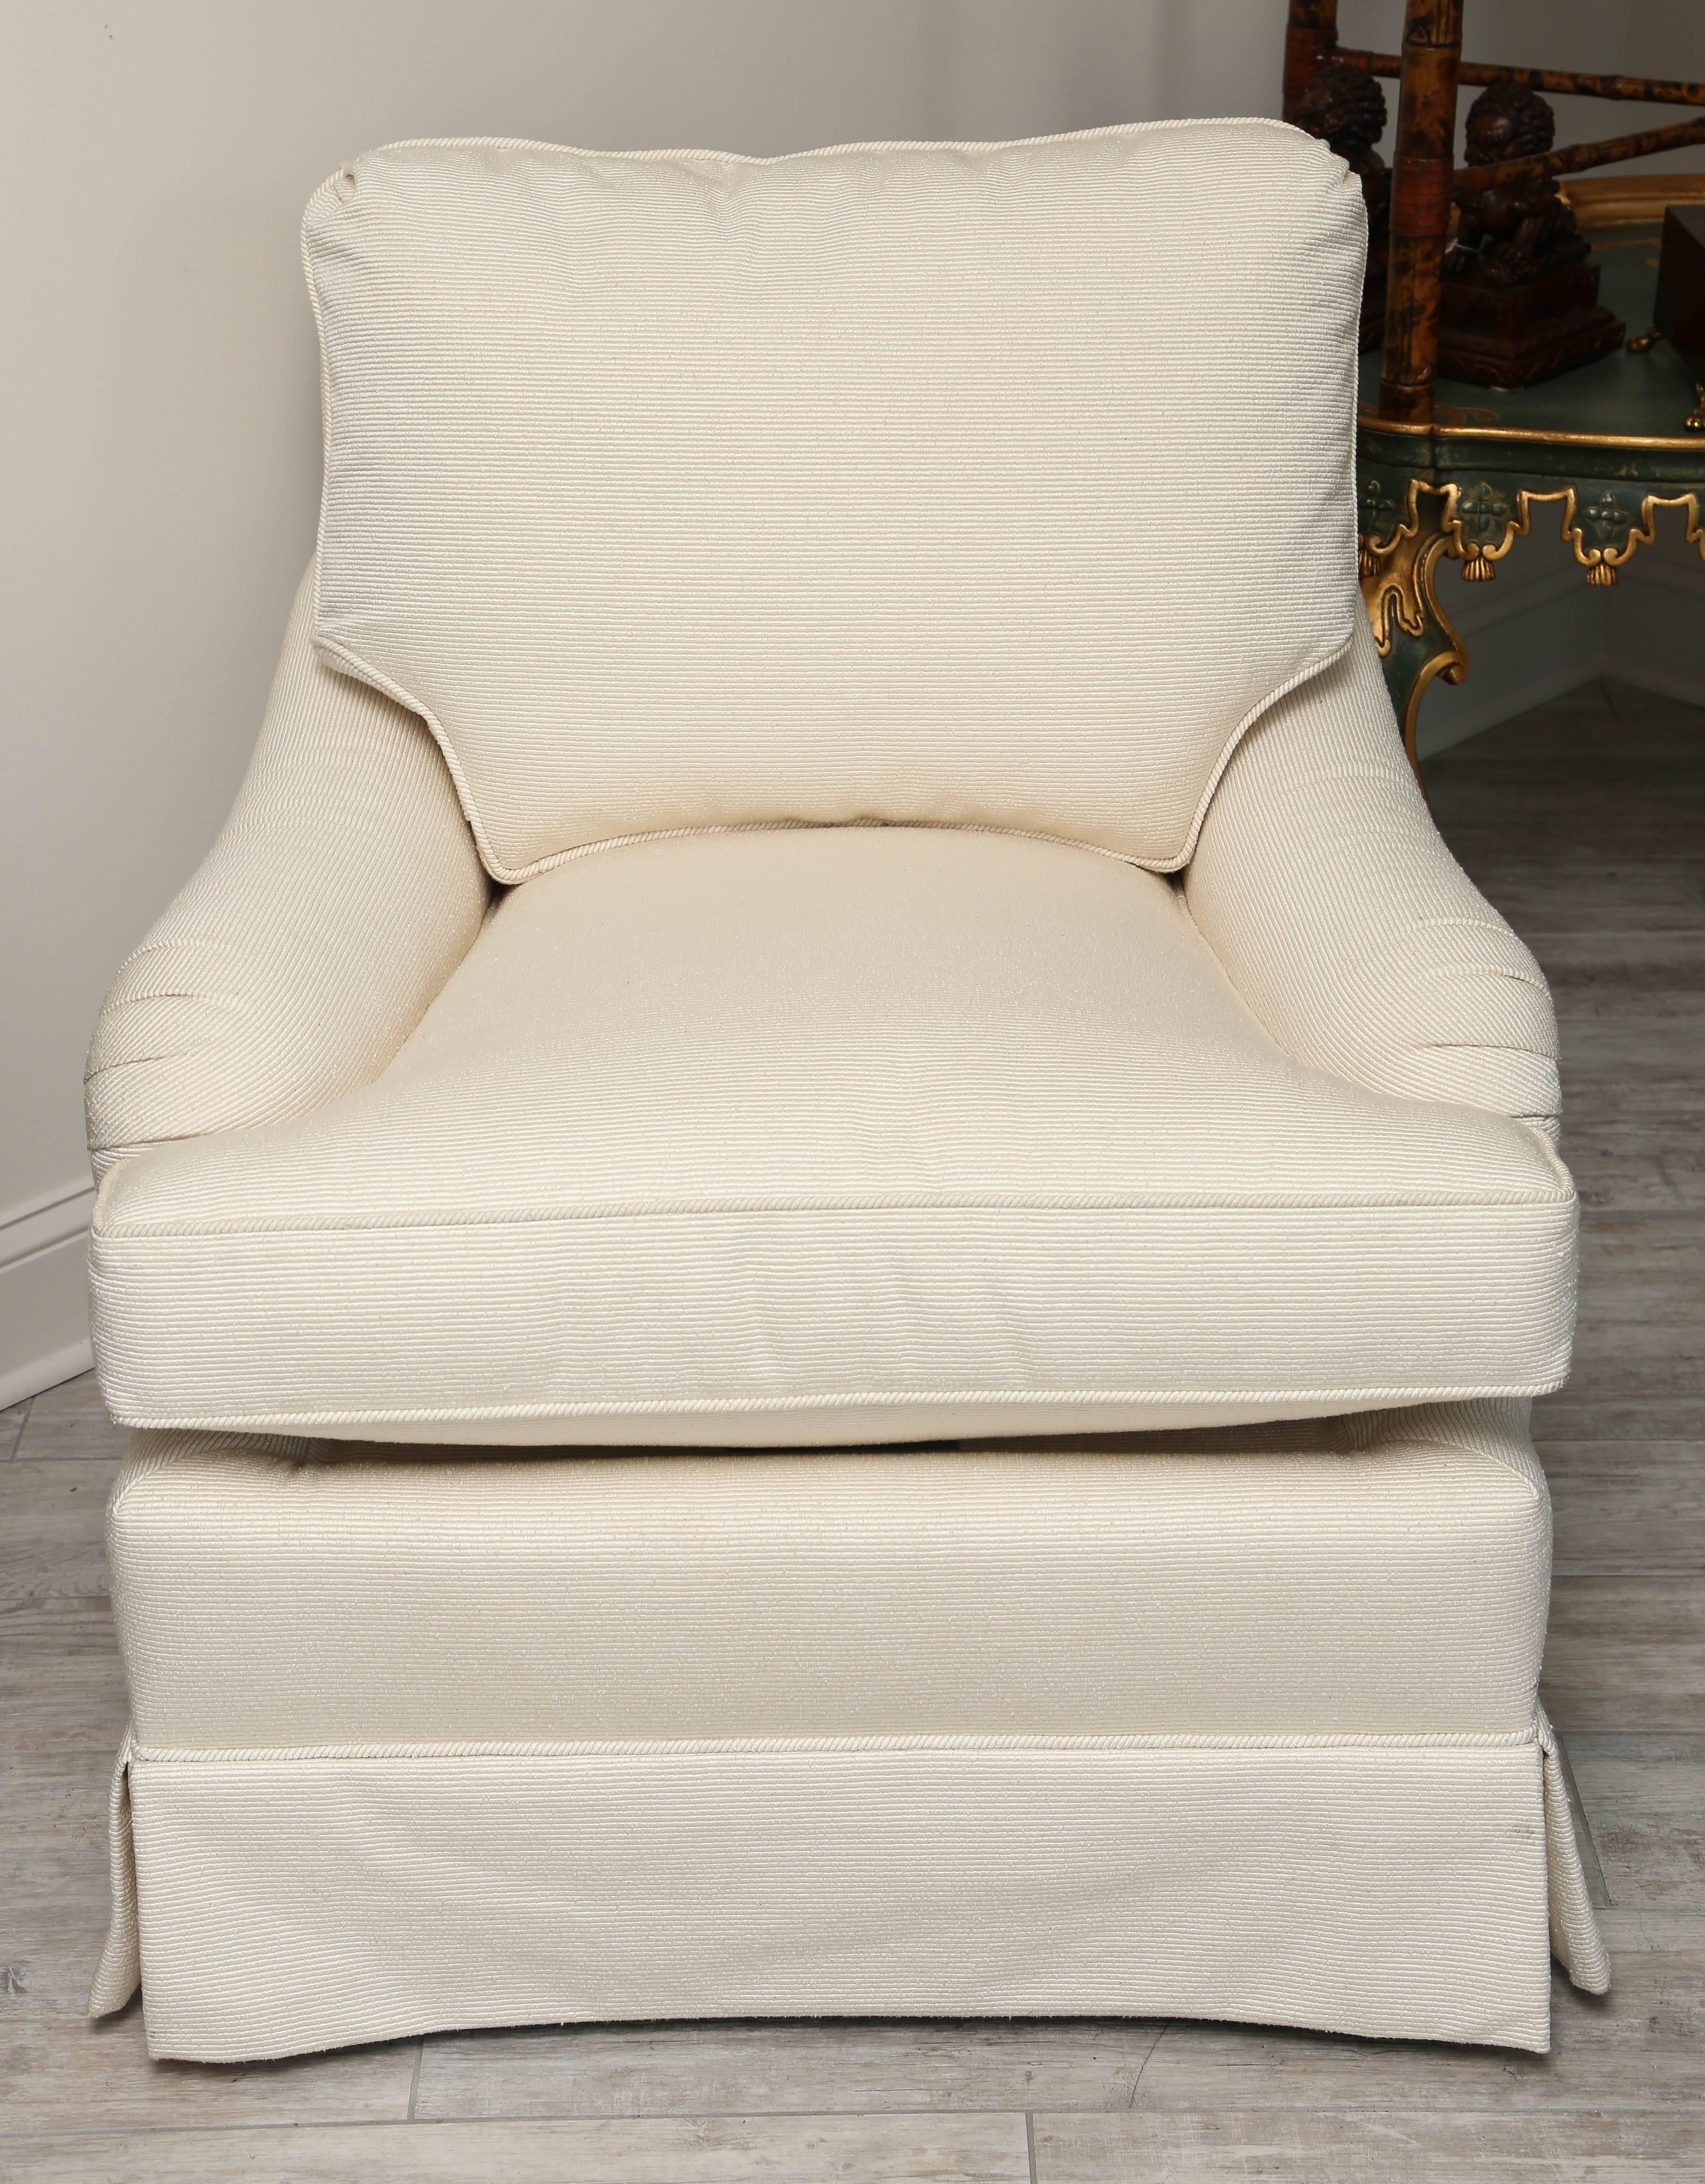 Elegant pair of cream colored upholstered club chairs mounted on a swivel base by Edward Ferrell for Lewis Mittman.